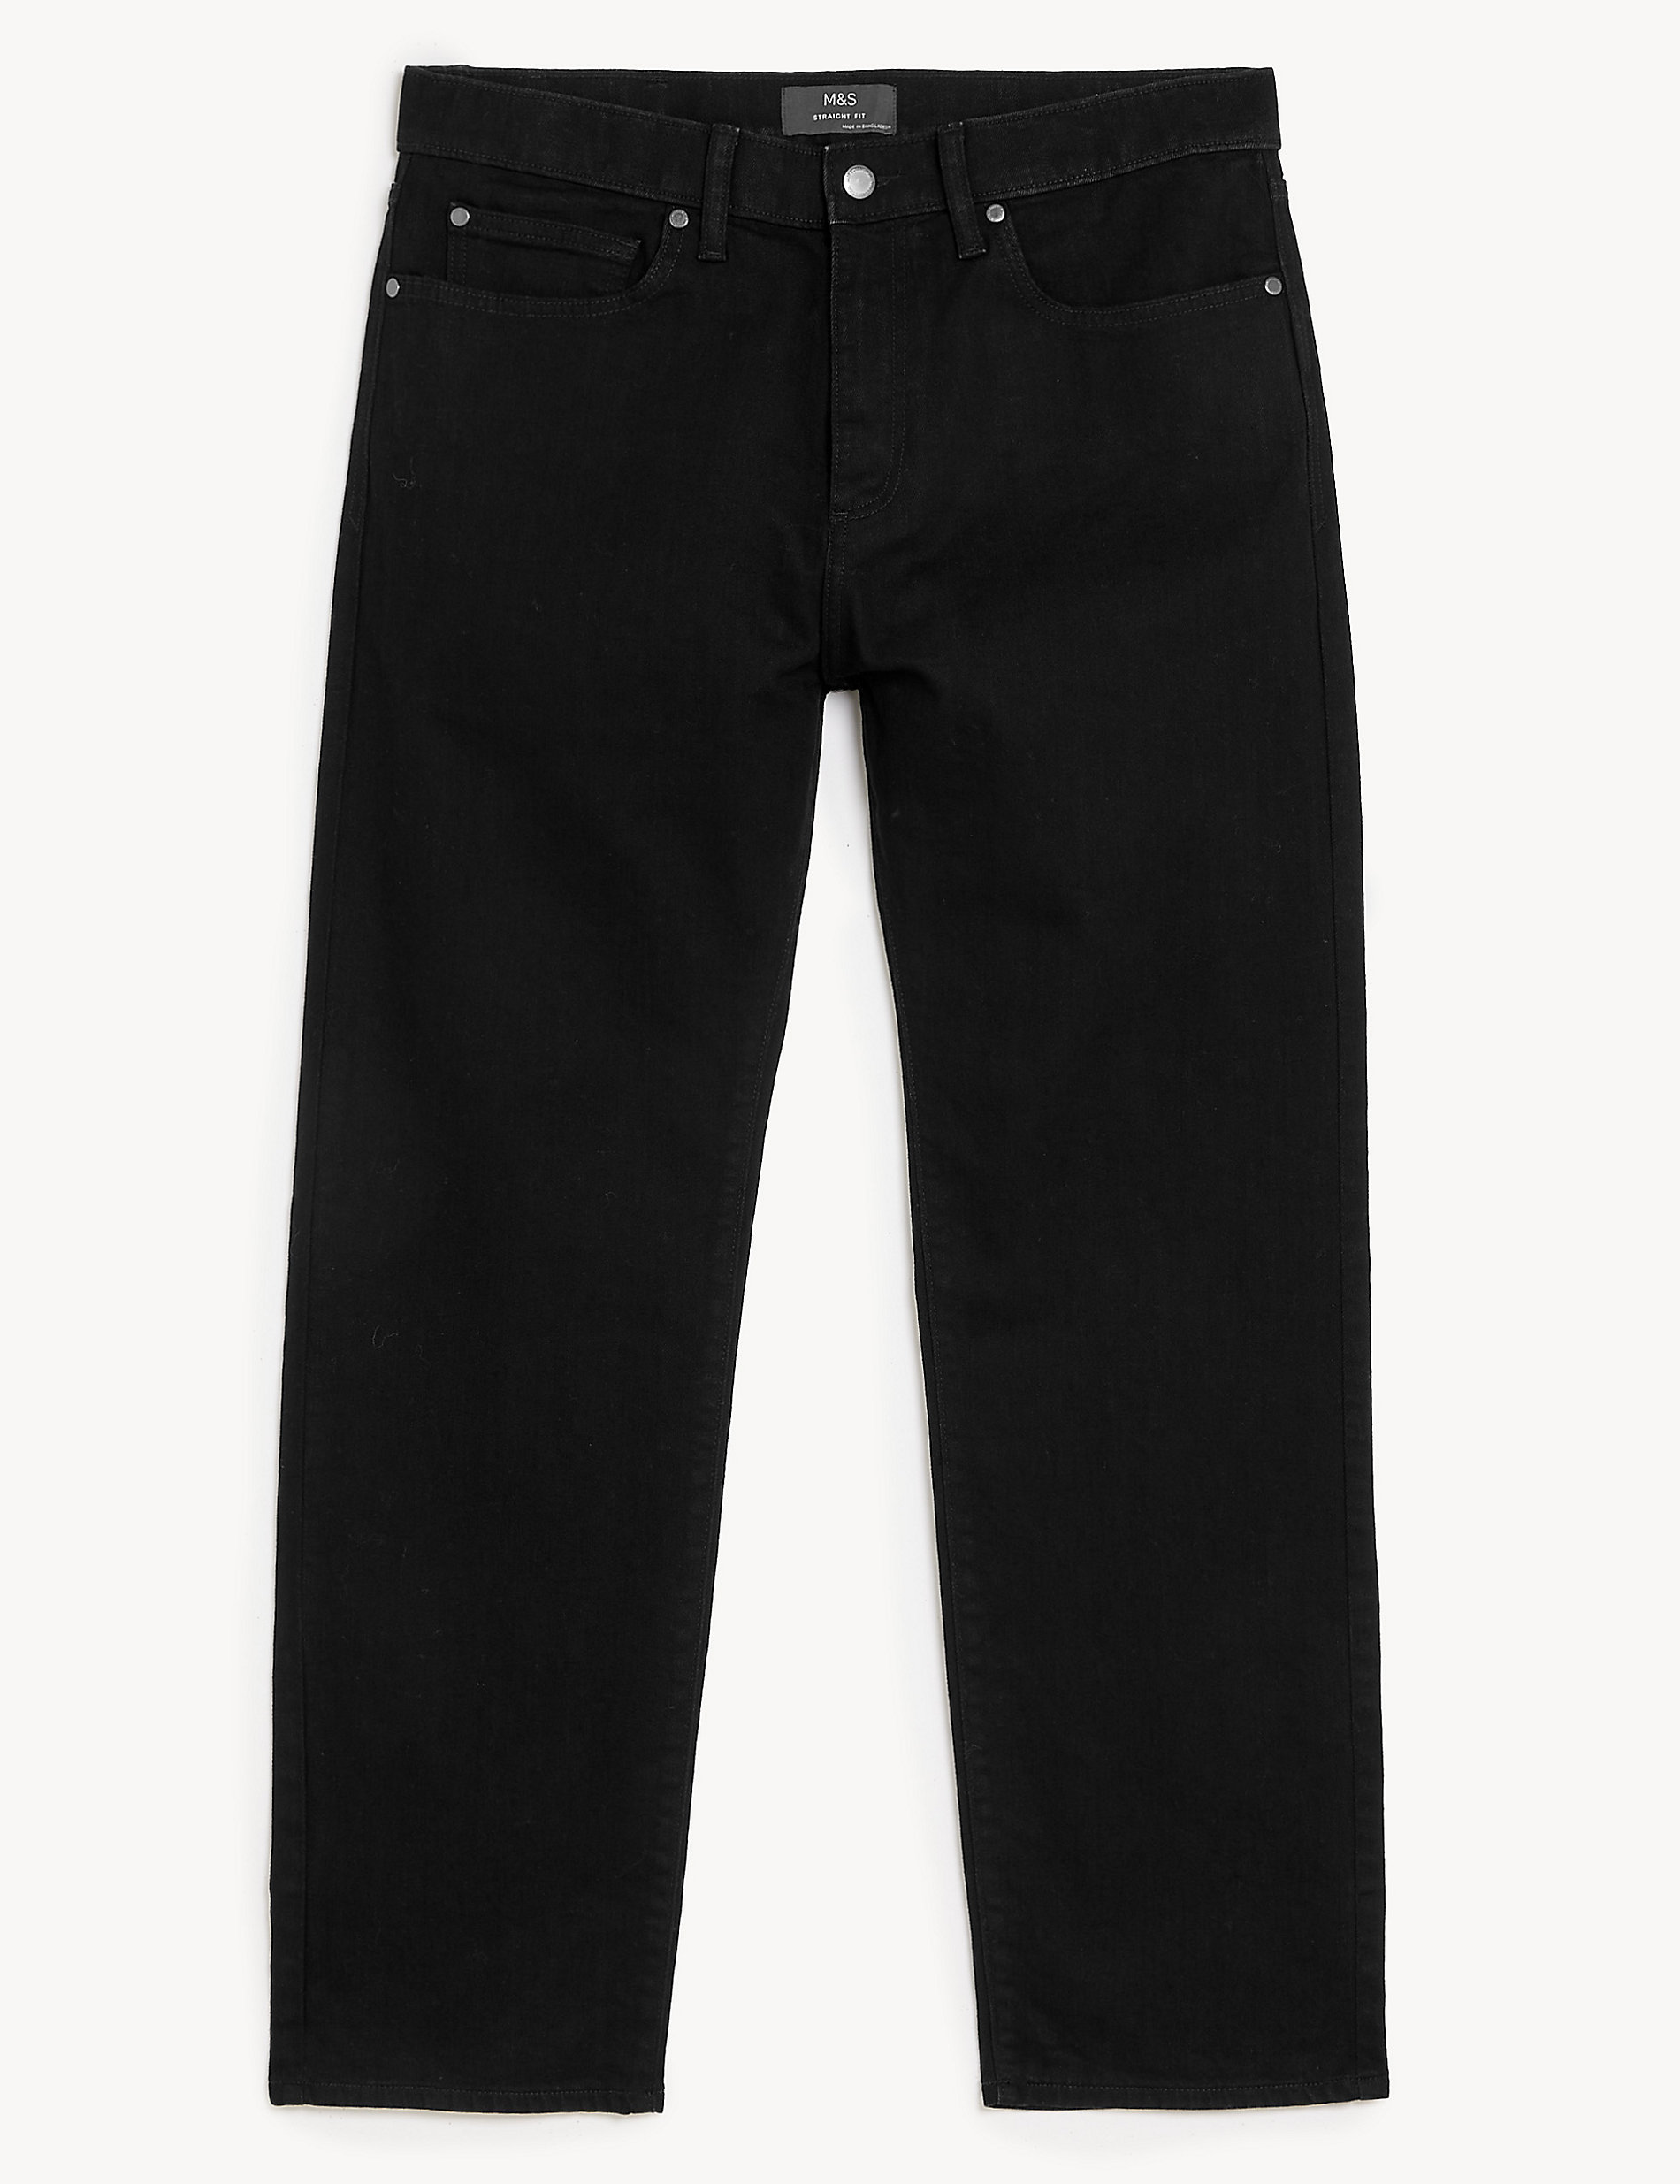 Shorter Length Stretch Jeans with Stormwear™